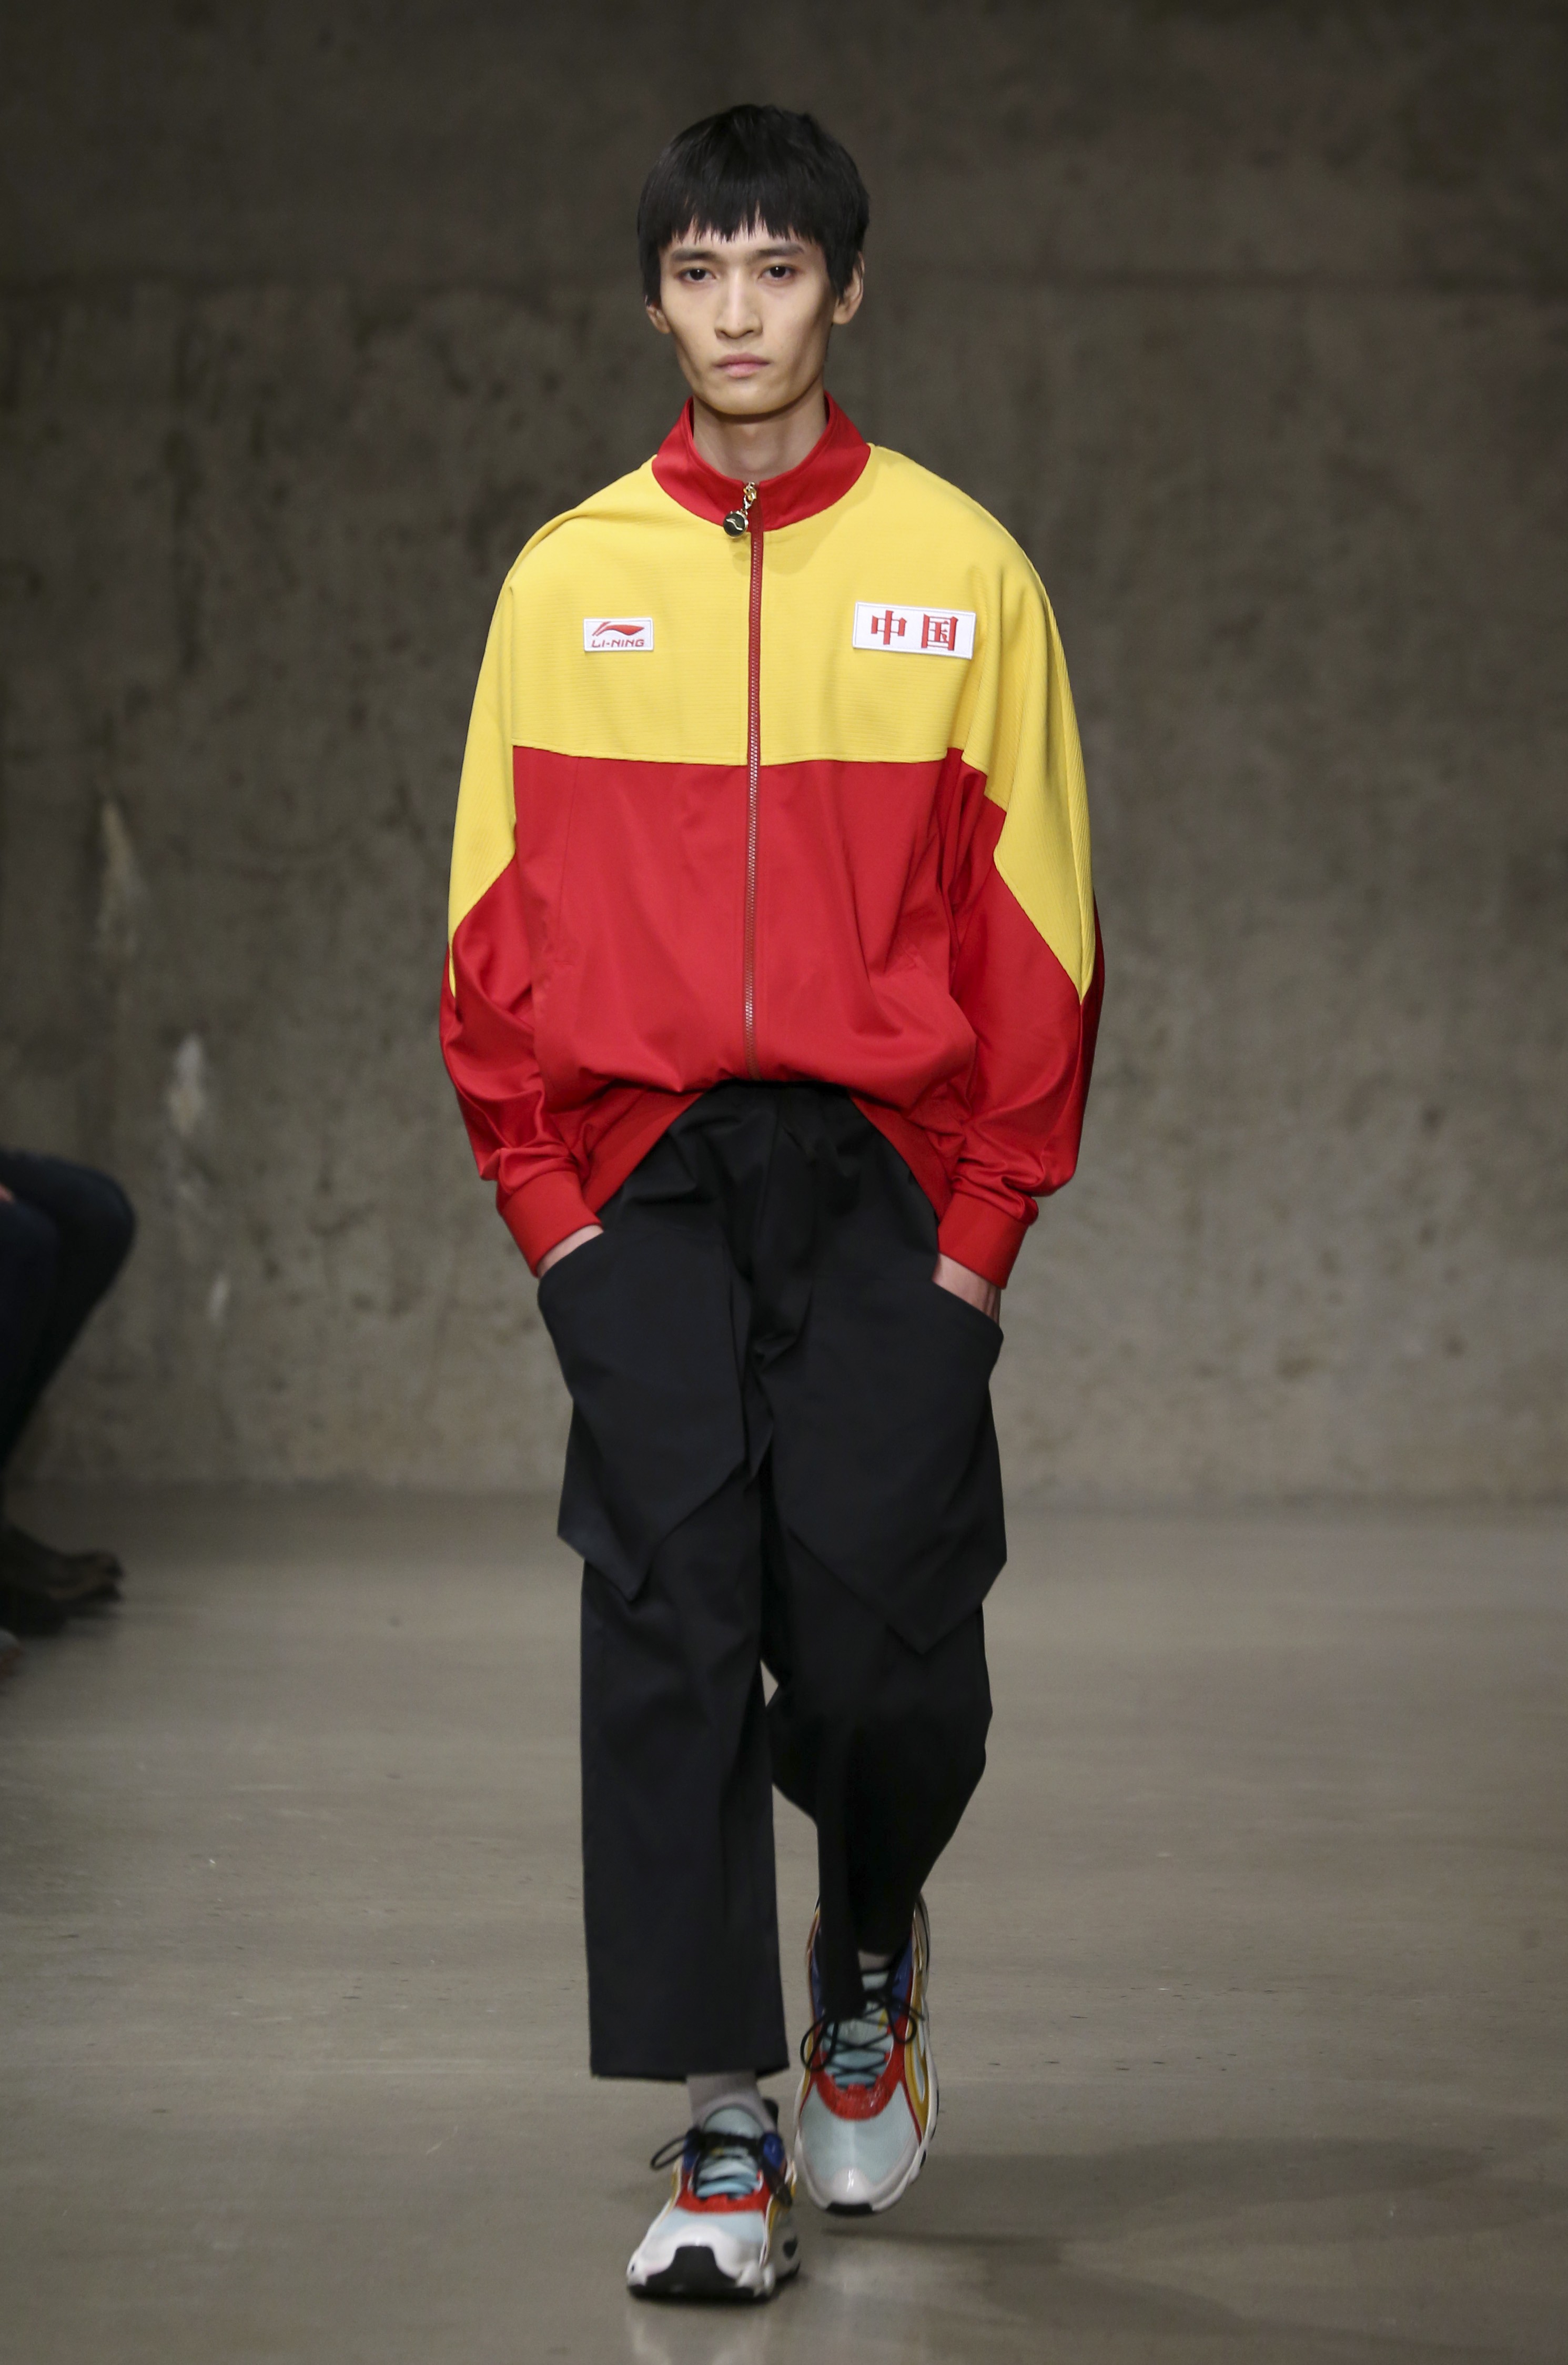 Established brands and emerging designers are playing to the national pride of Chinese youth by emblazoning Chinese characters on their fashions and using the colours of the national flag